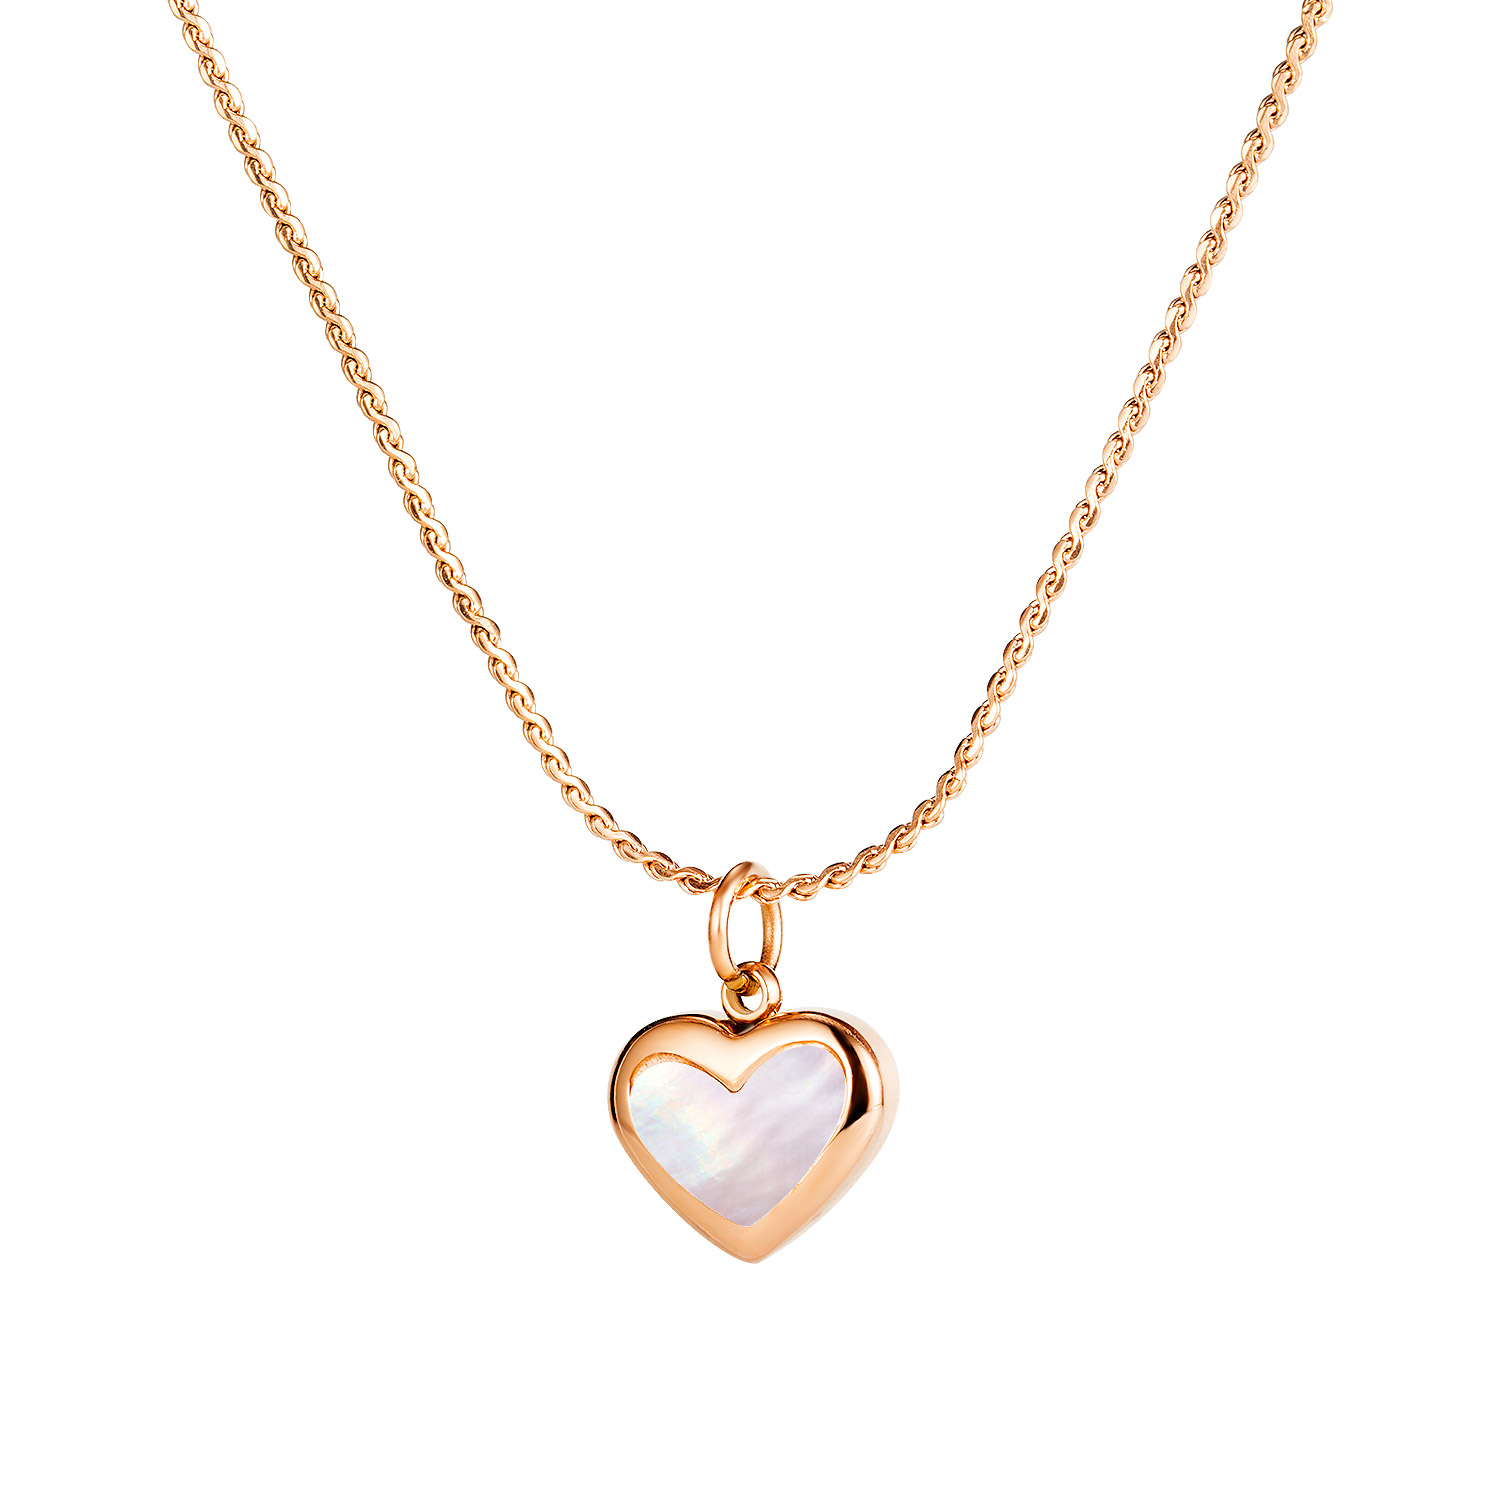 Sweet Shell Love Heart Pendant Necklace Women Luxury Stainless Steel Jewelry Bling For Girlfriends Extension Chain 18inch n1476